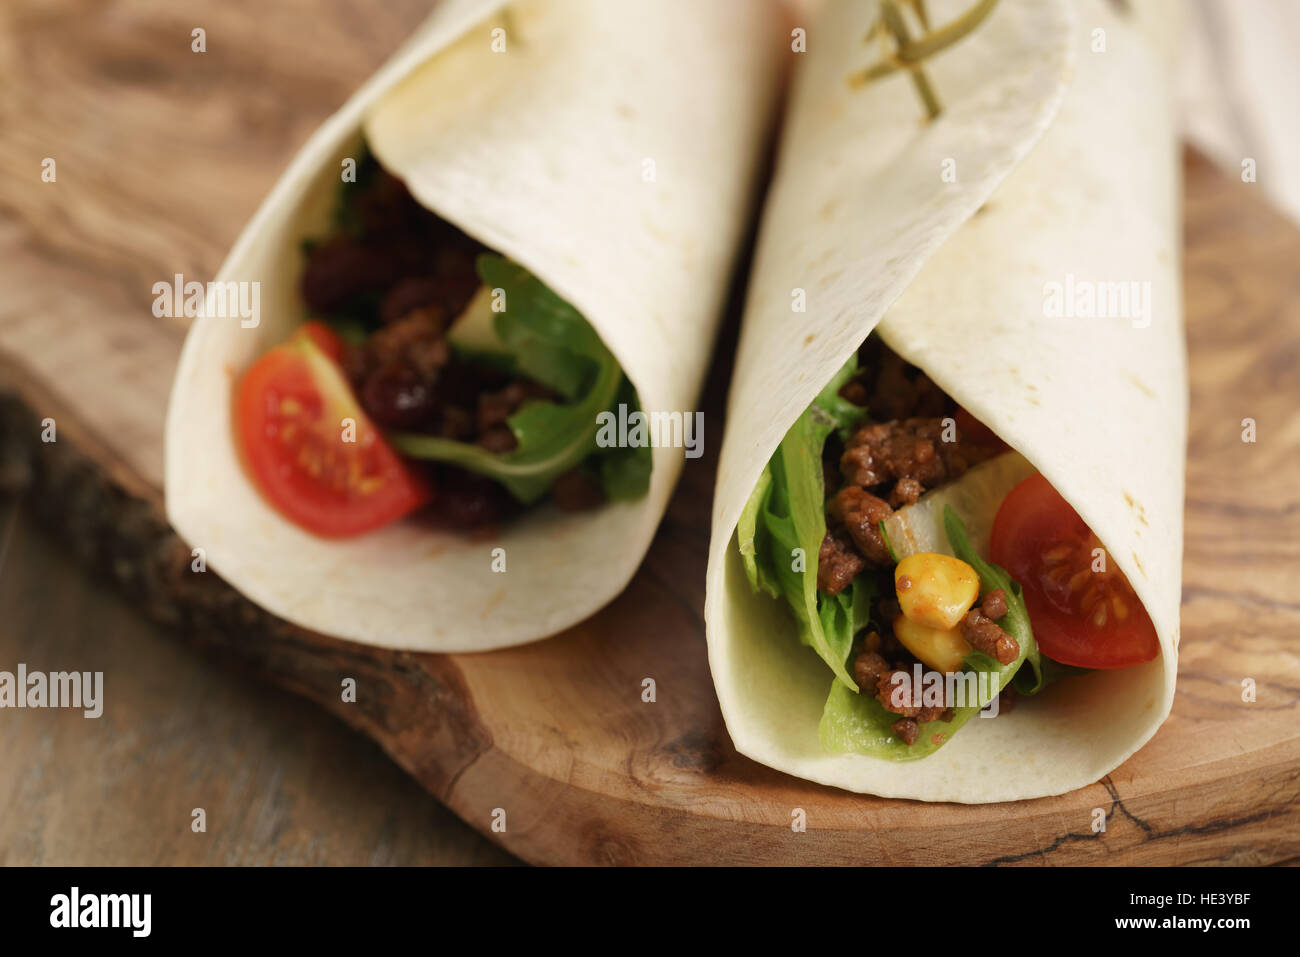 fresh homemade tortilla wrap sandwiches with beef and vegetables on olive board Stock Photo